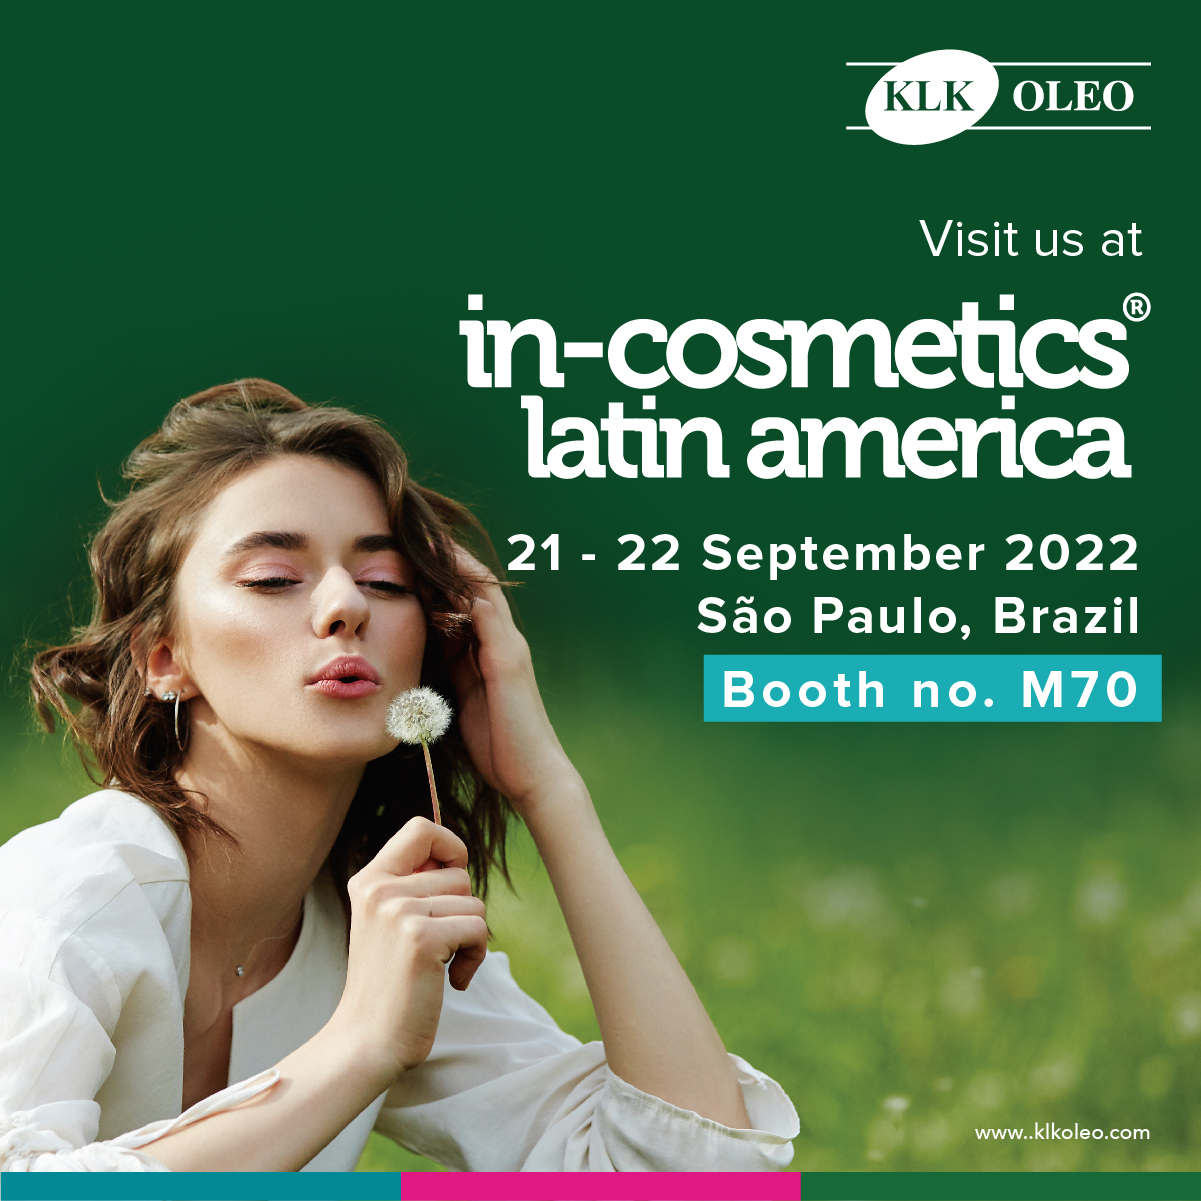 Get in touch with us at the incosmetics Latin America! KLK OLEO